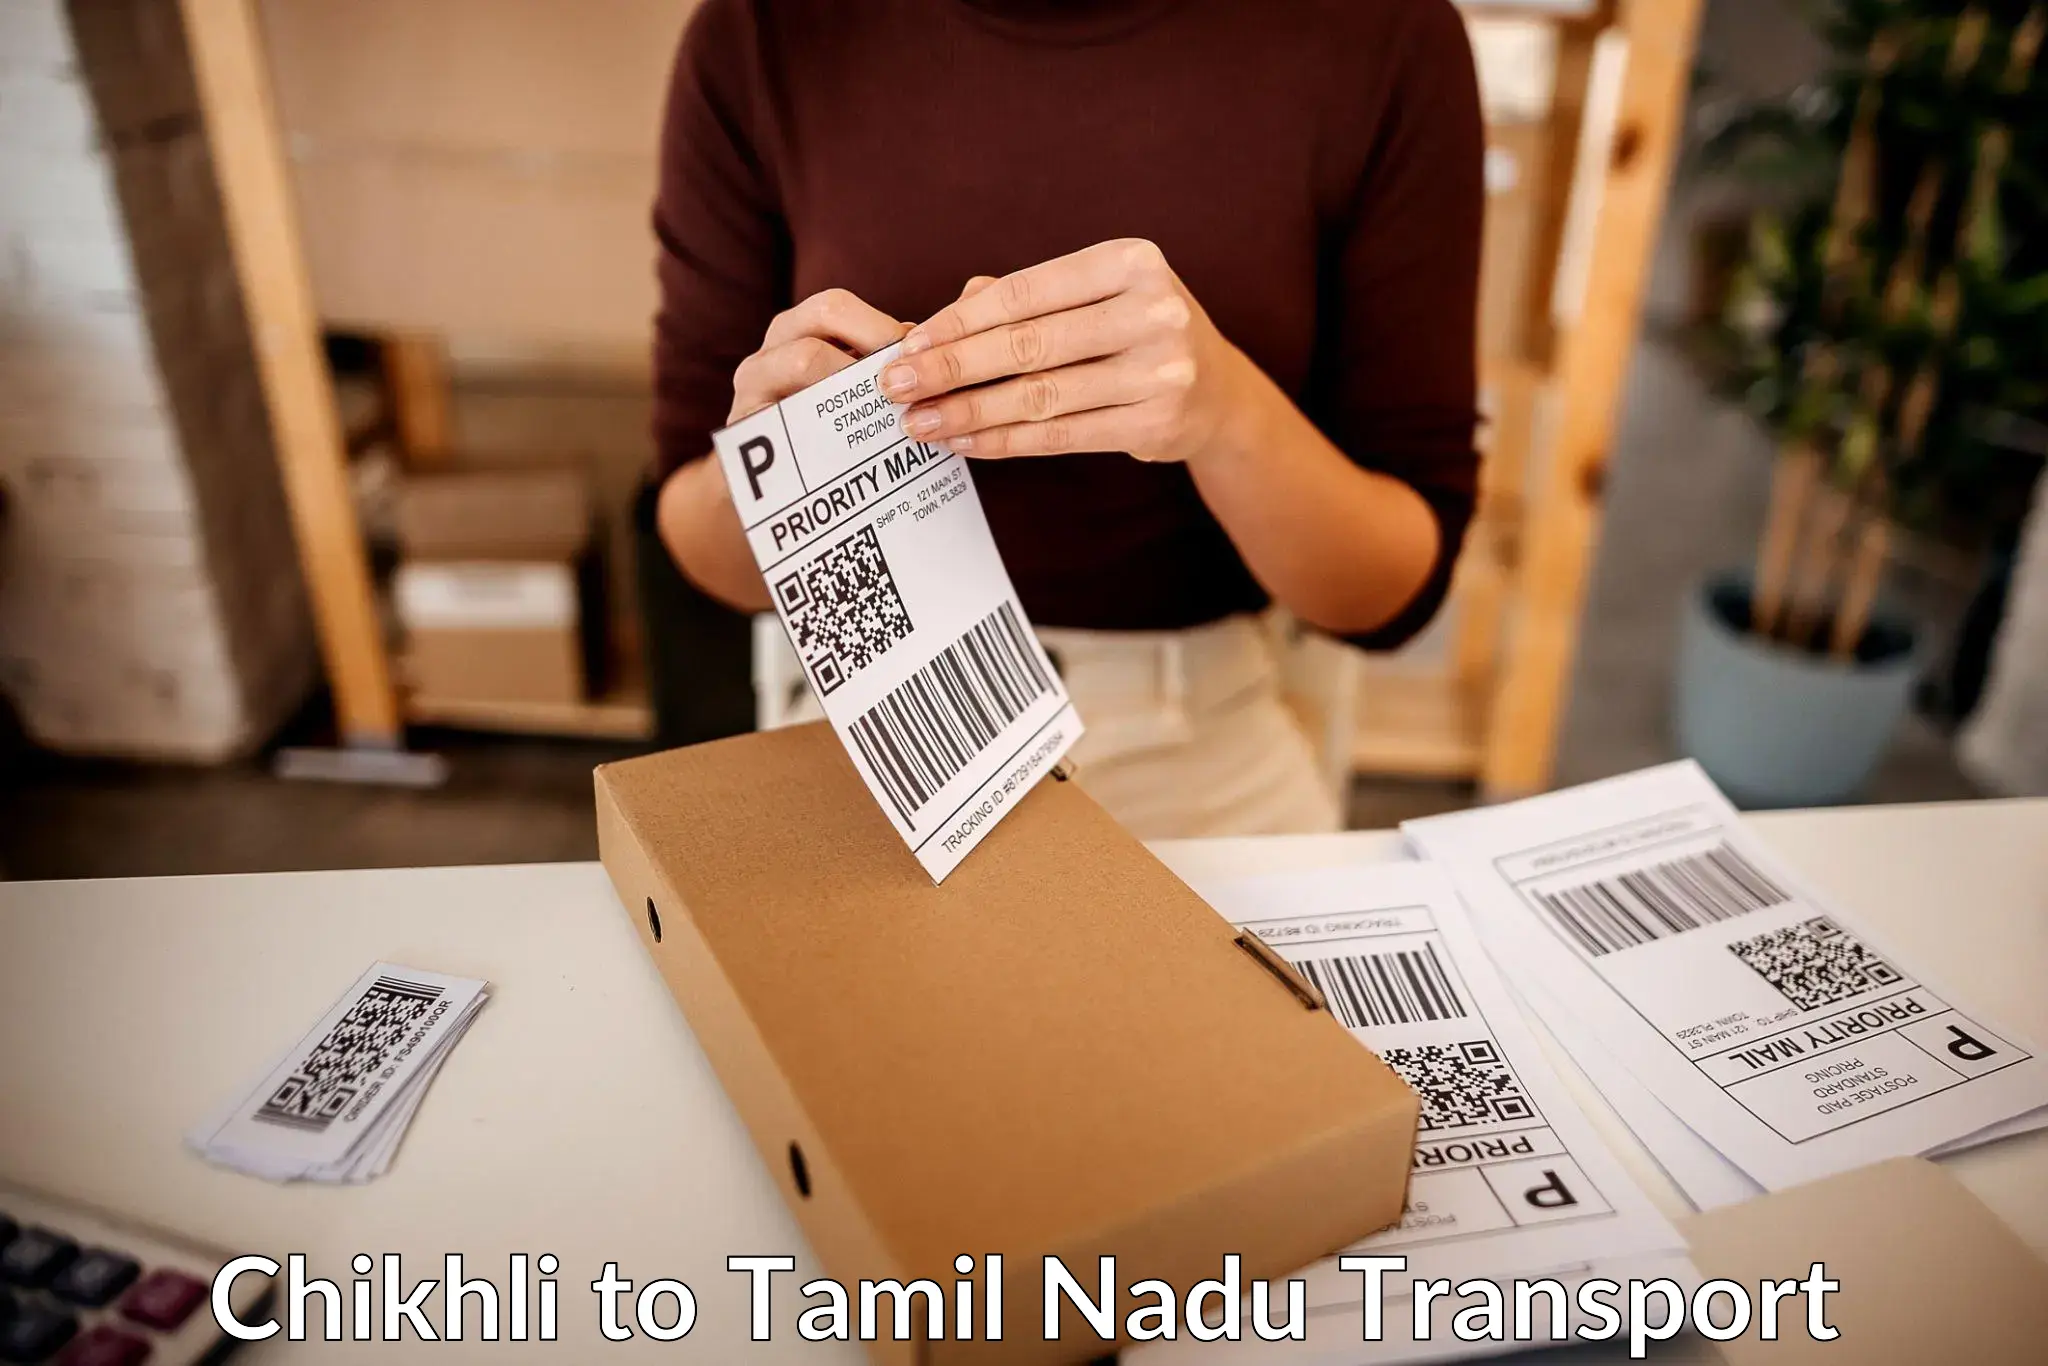 Air freight transport services Chikhli to Vellore Institute of Technology